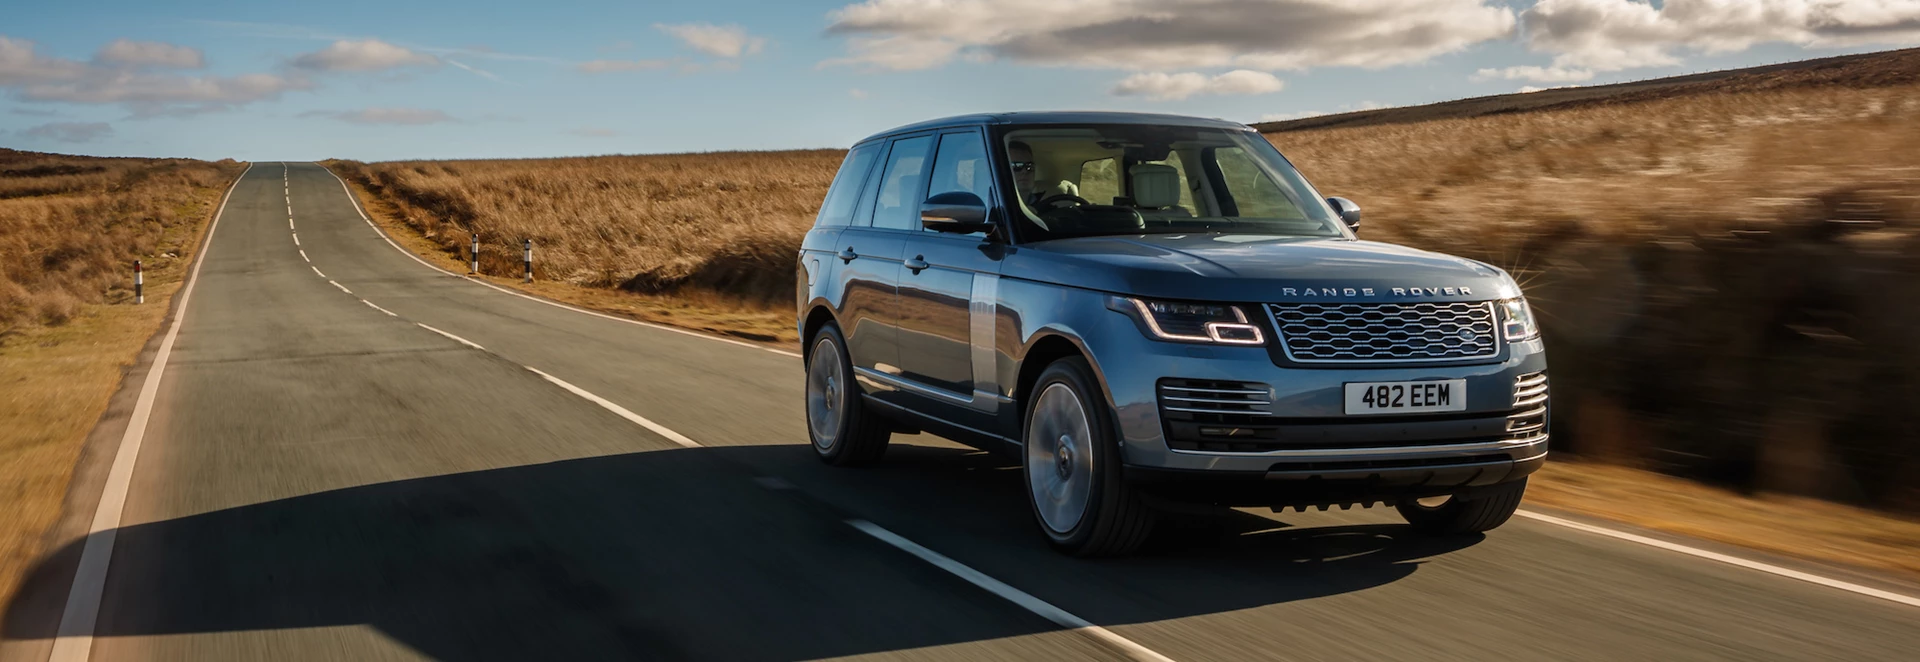 2018 Range Rover review 